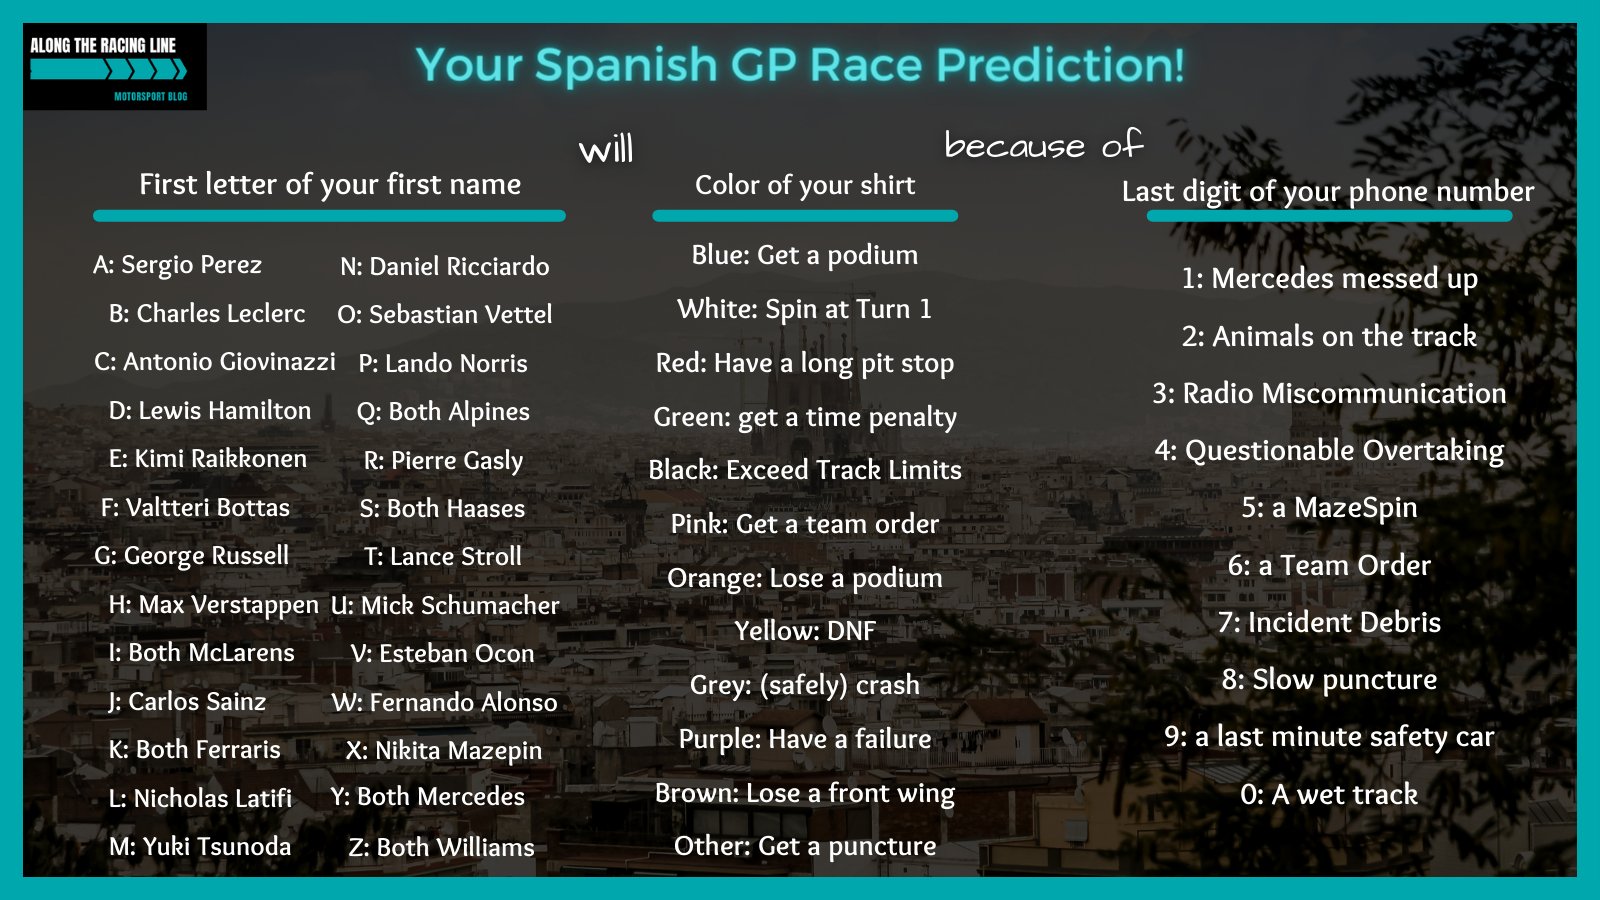 Along The Racing Line Are You Ready For This Weekend S Spanishgp Qrt With What Your Race Prediction Is Bonus Points If It Actually Happened T Co Tgwfge073z Twitter